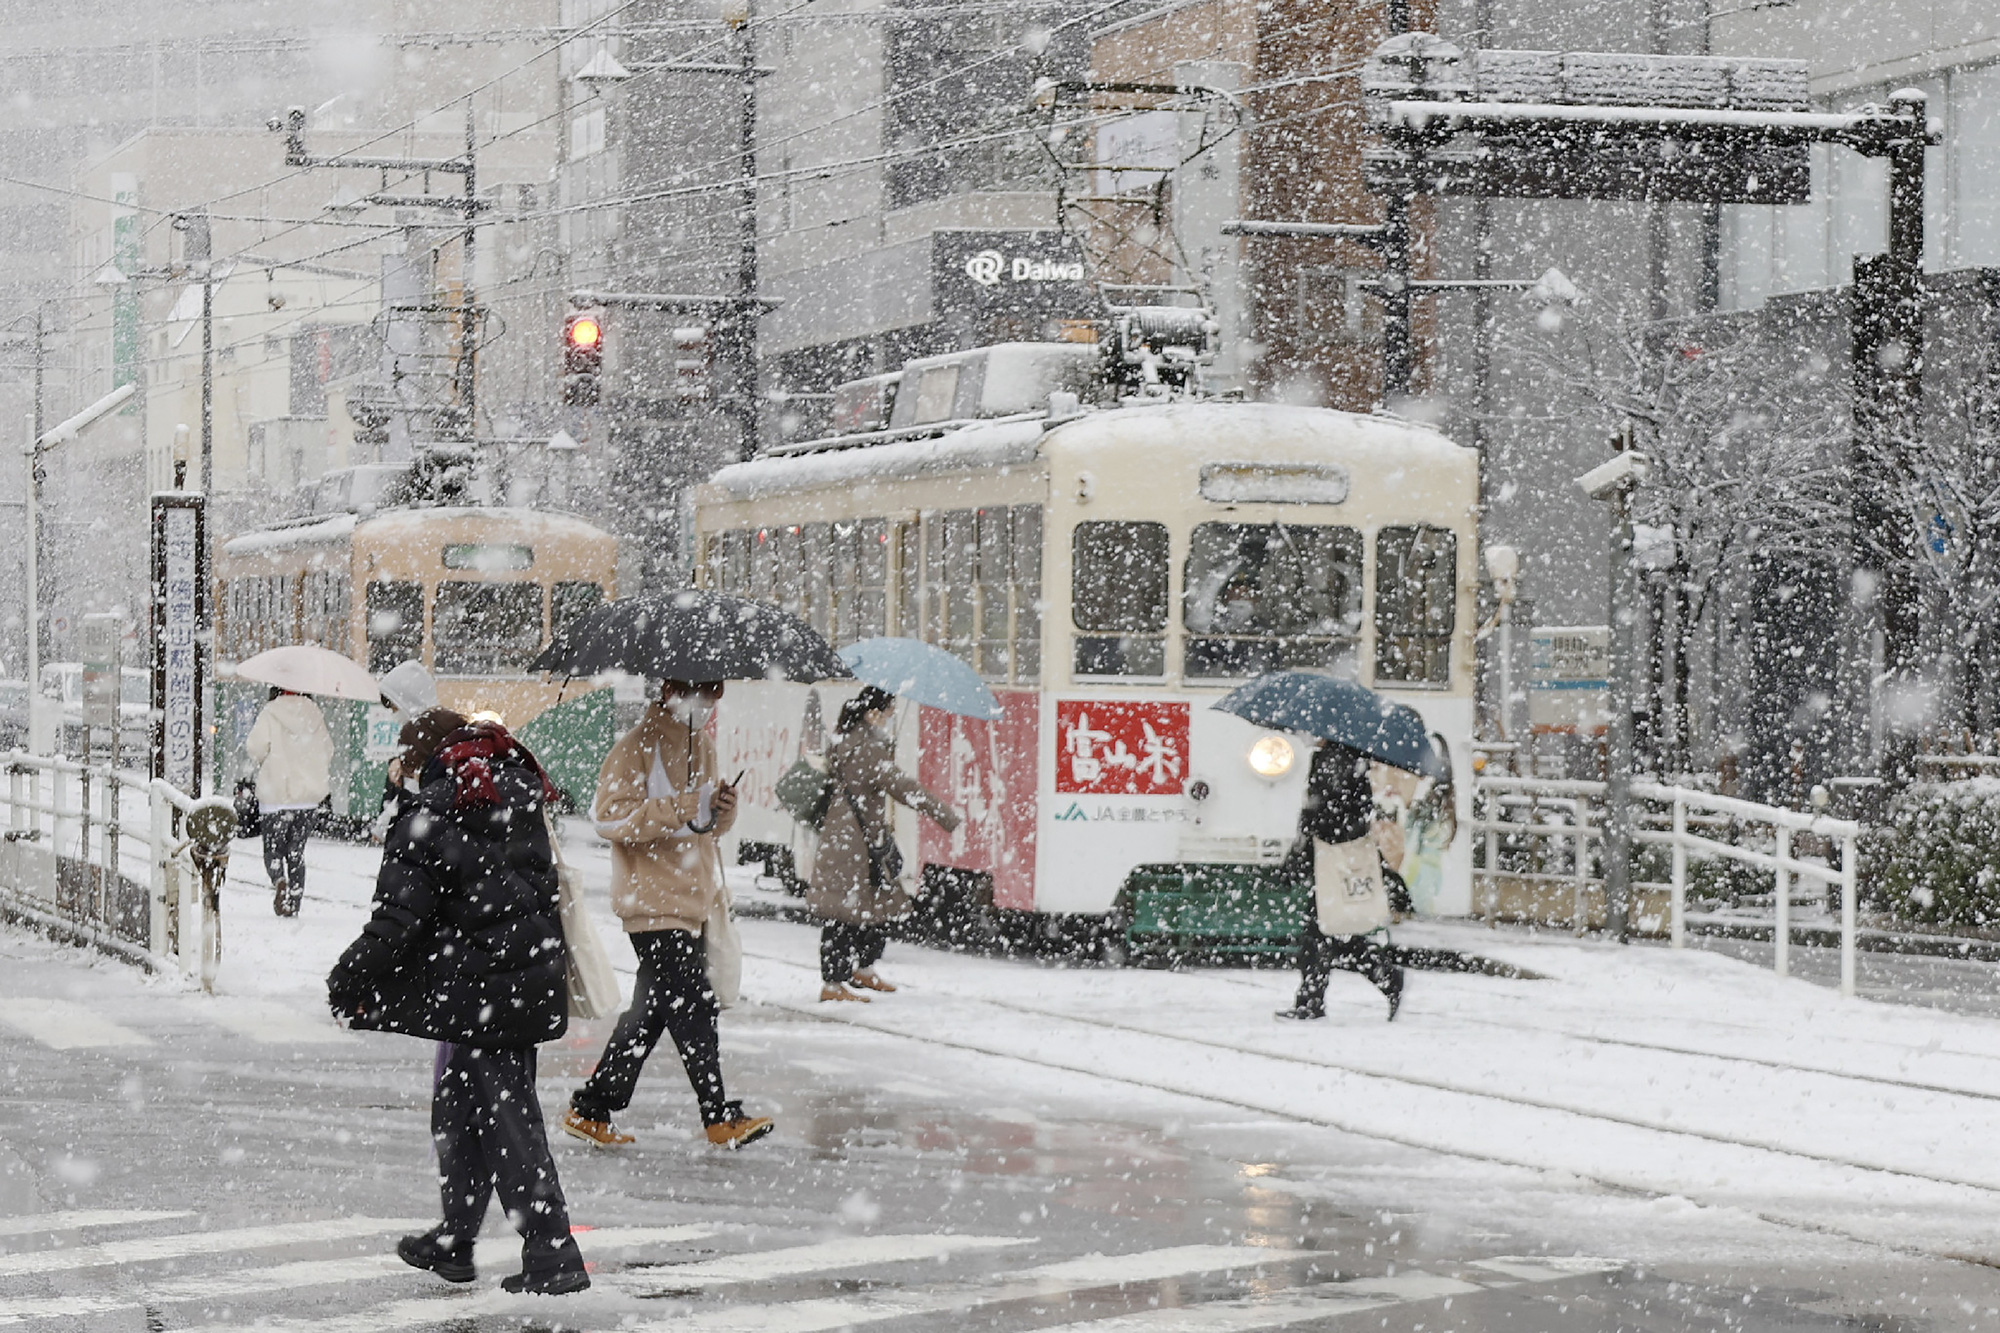 Snow fell a meter thick, Japanese people struggled in the record cold - Photo 7.